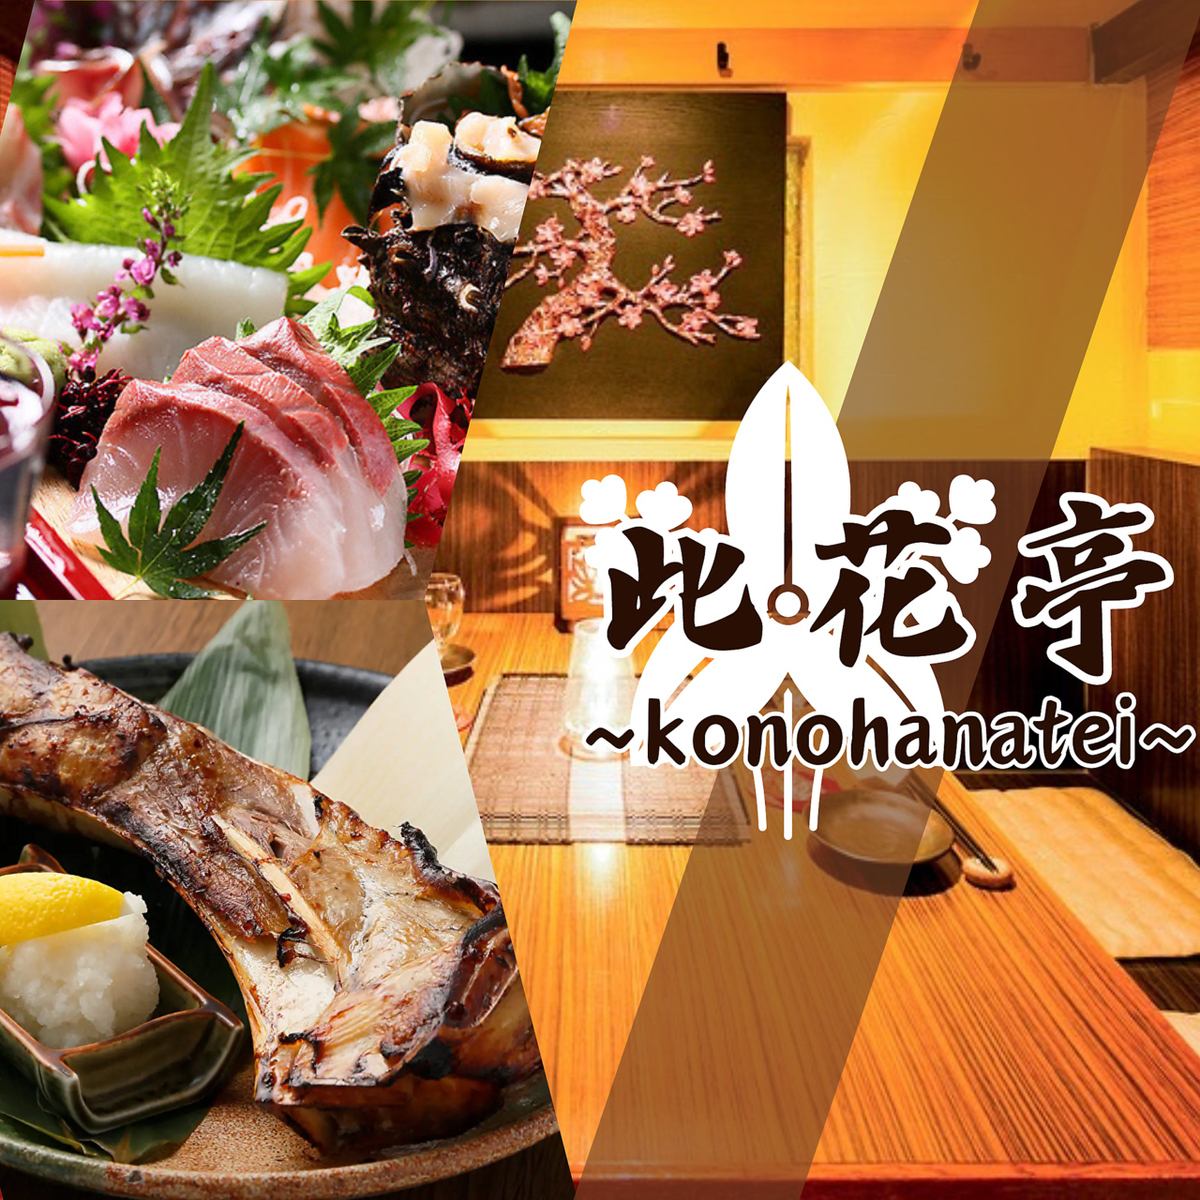 1 minute walk from the east exit of Ikebukuro Station [Private rooms available] Shop with carefully selected ingredients ≪Fresh fish directly delivered from the fishing port x Domestic wagyu beef x Morning pulled local chicken≫